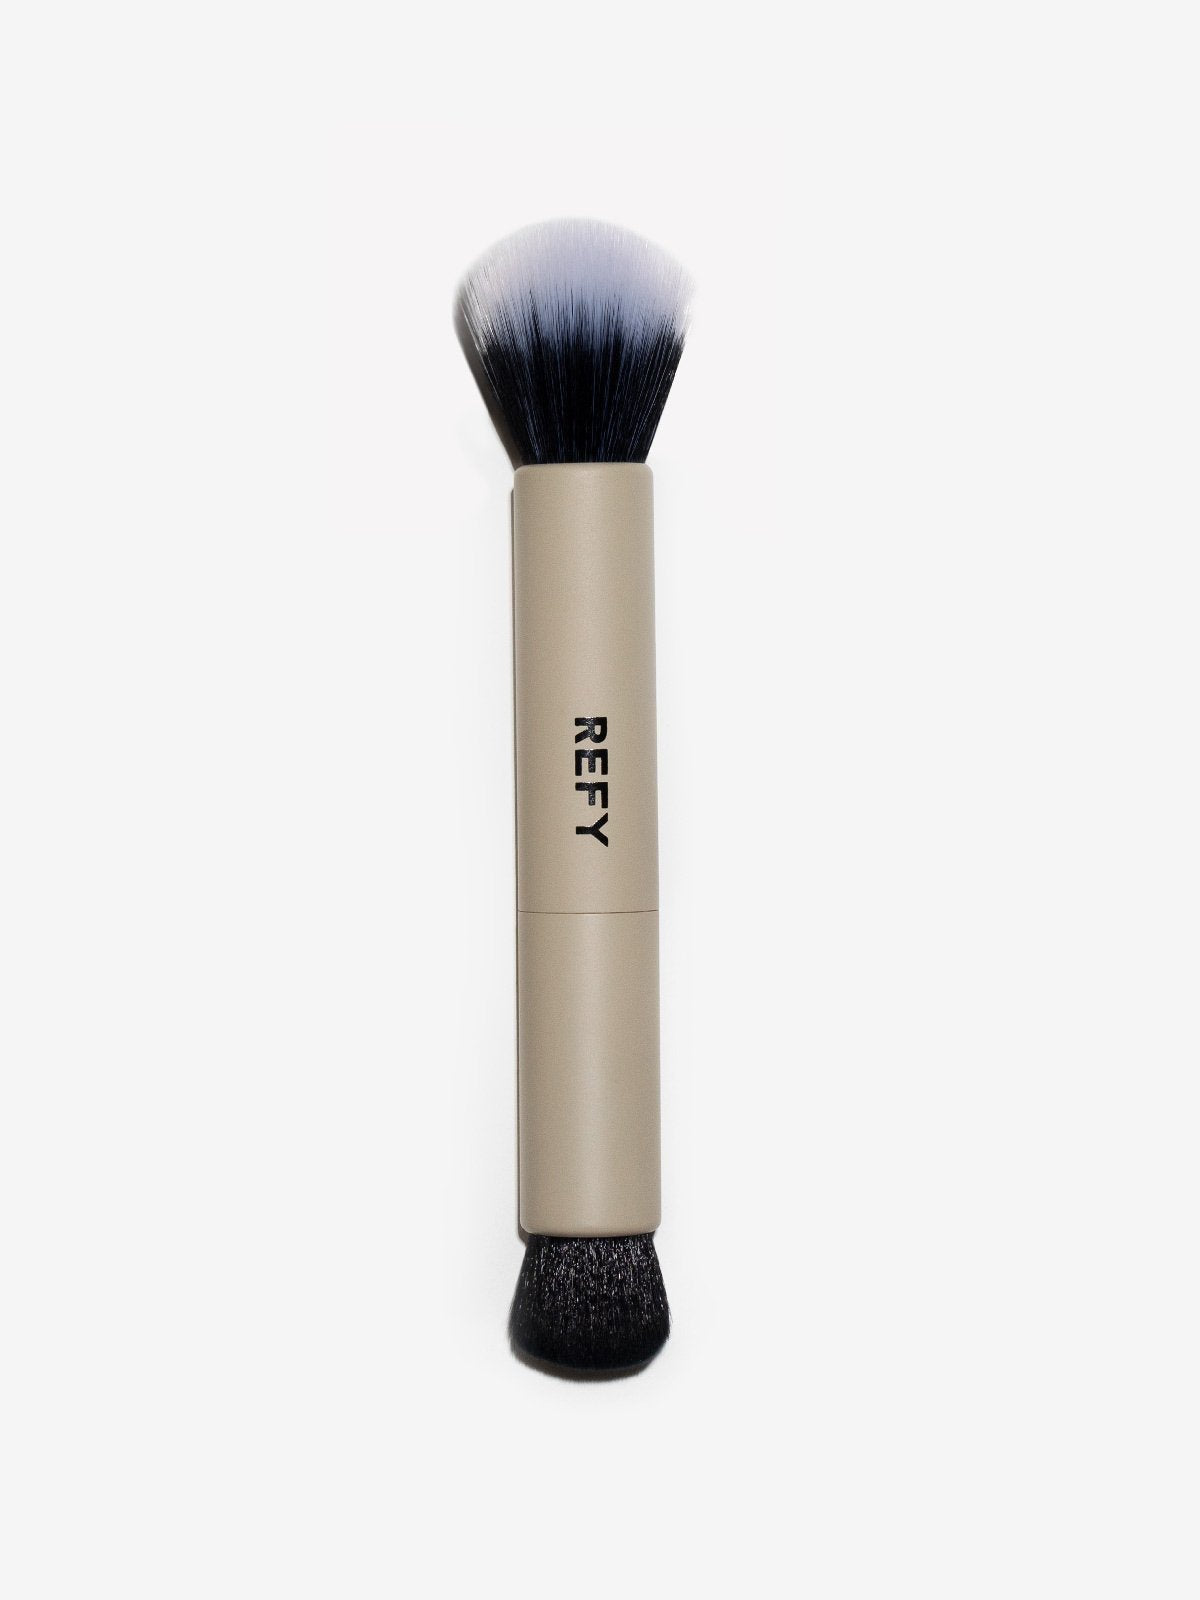 Small Round Fluffy Face Brush | B101